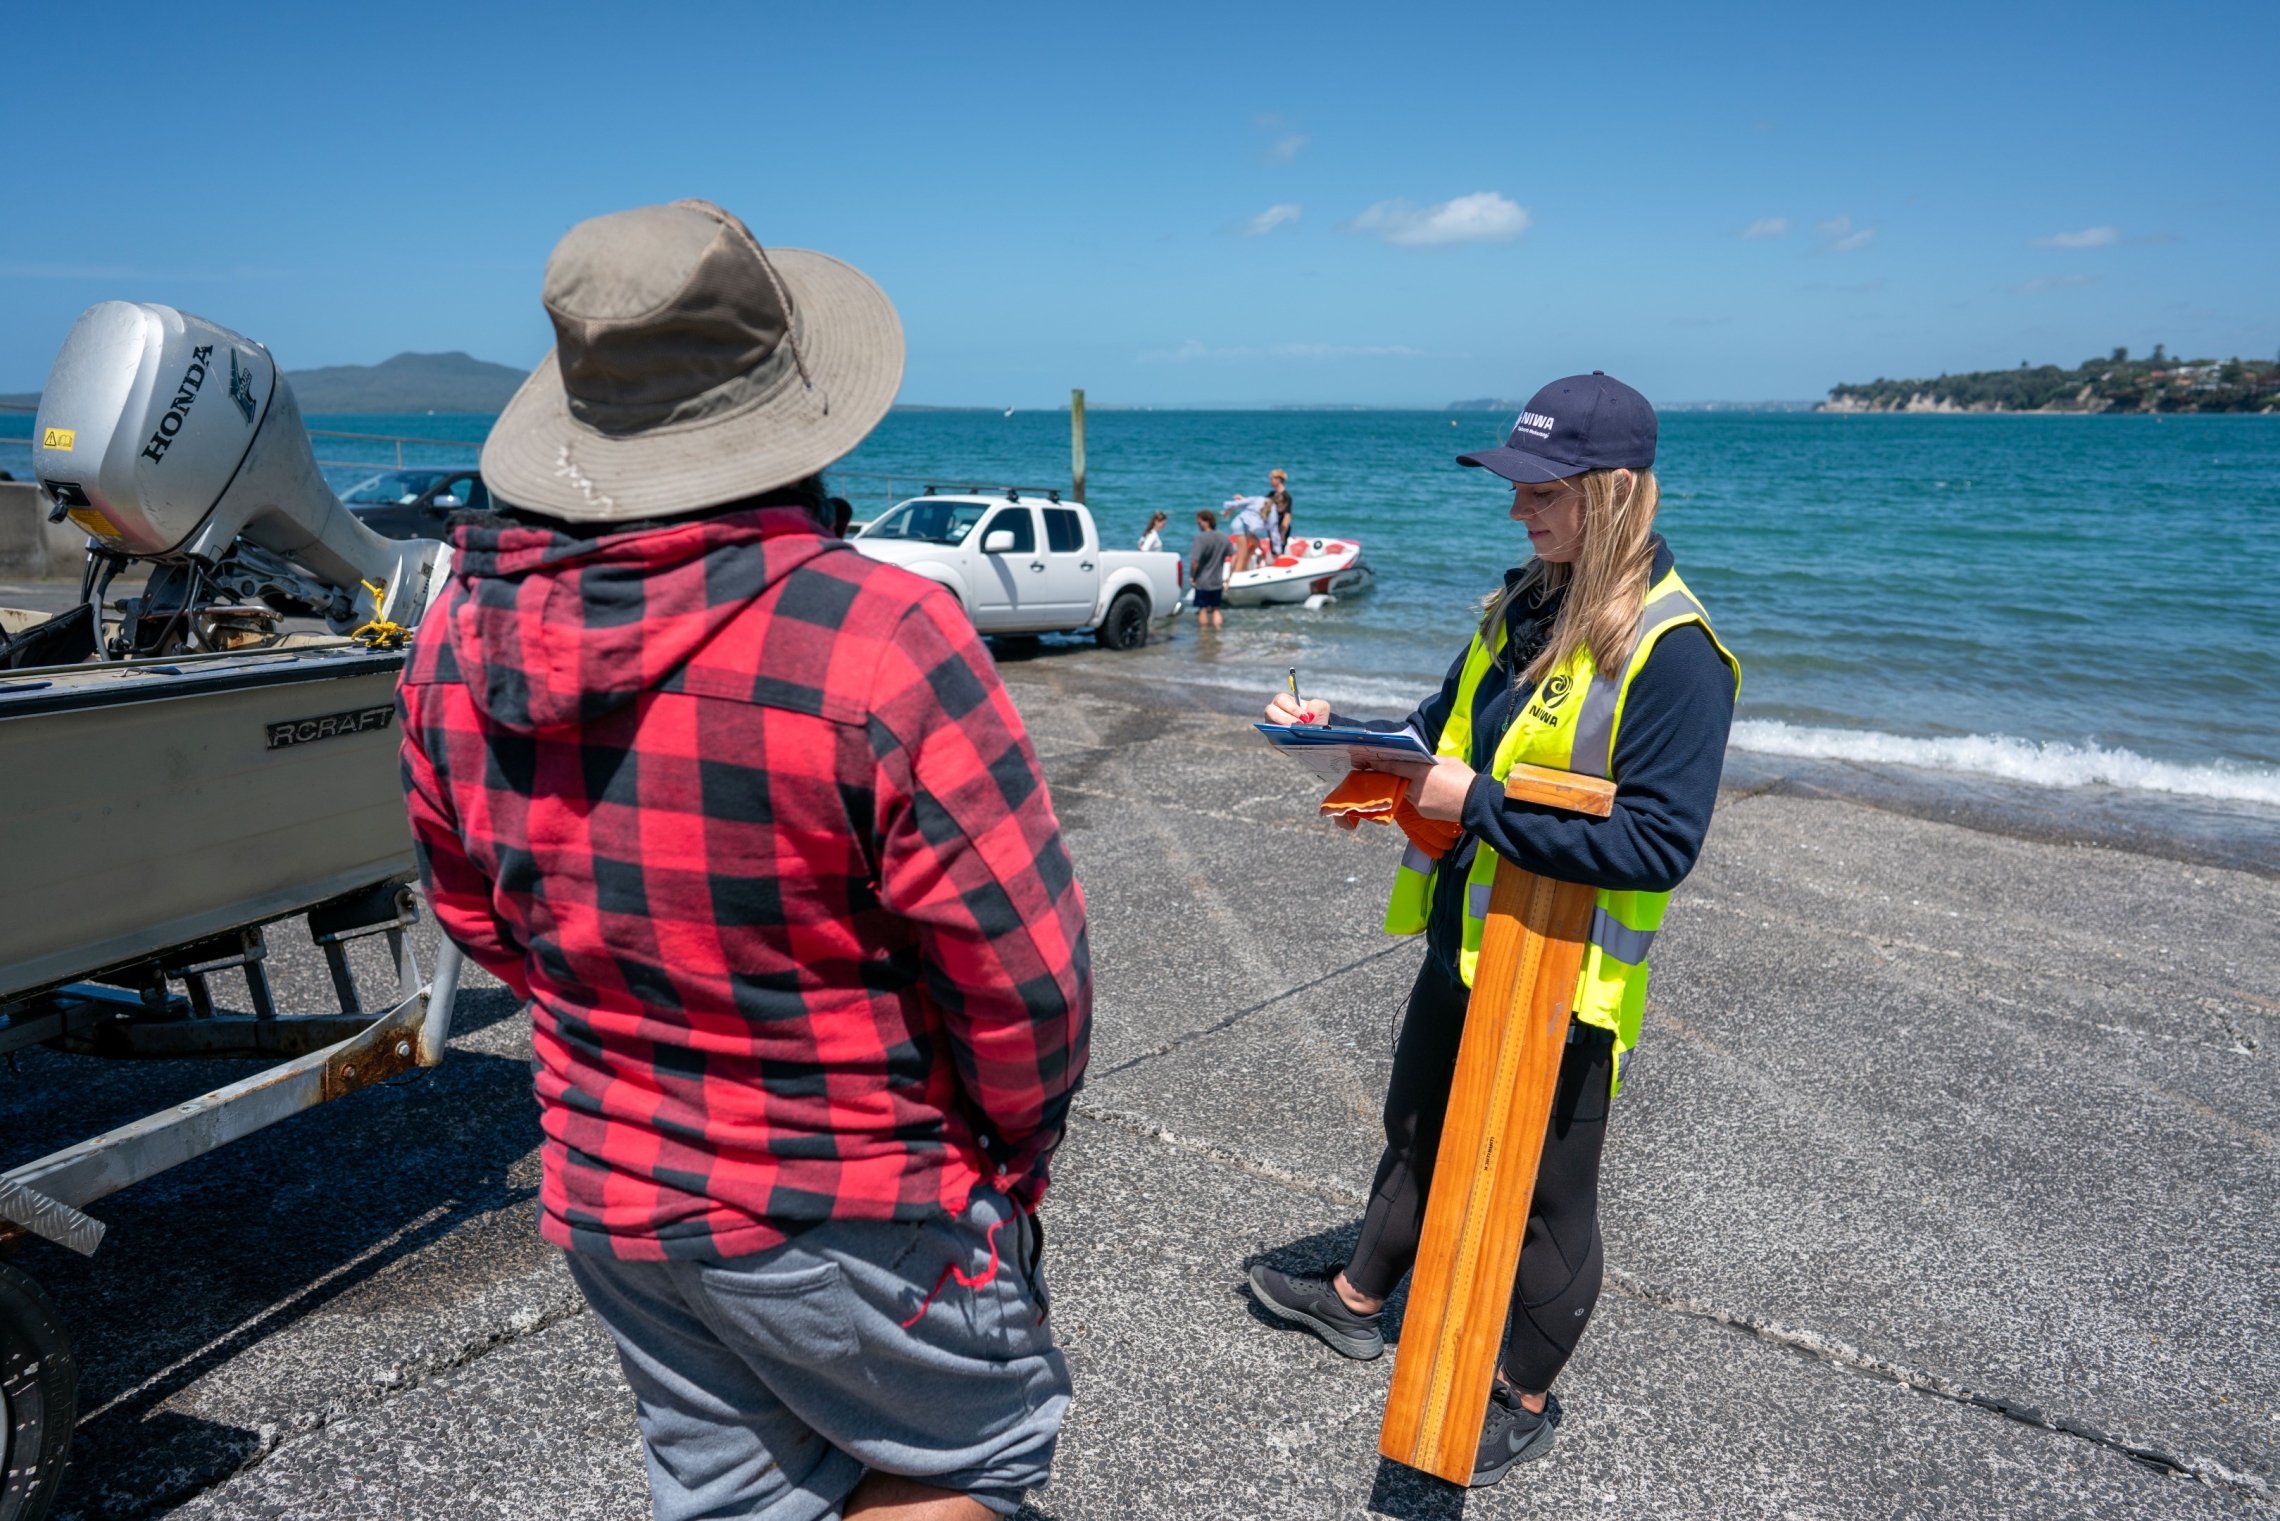 Fisheries scientist conducting boat ramp interview with a fisher.